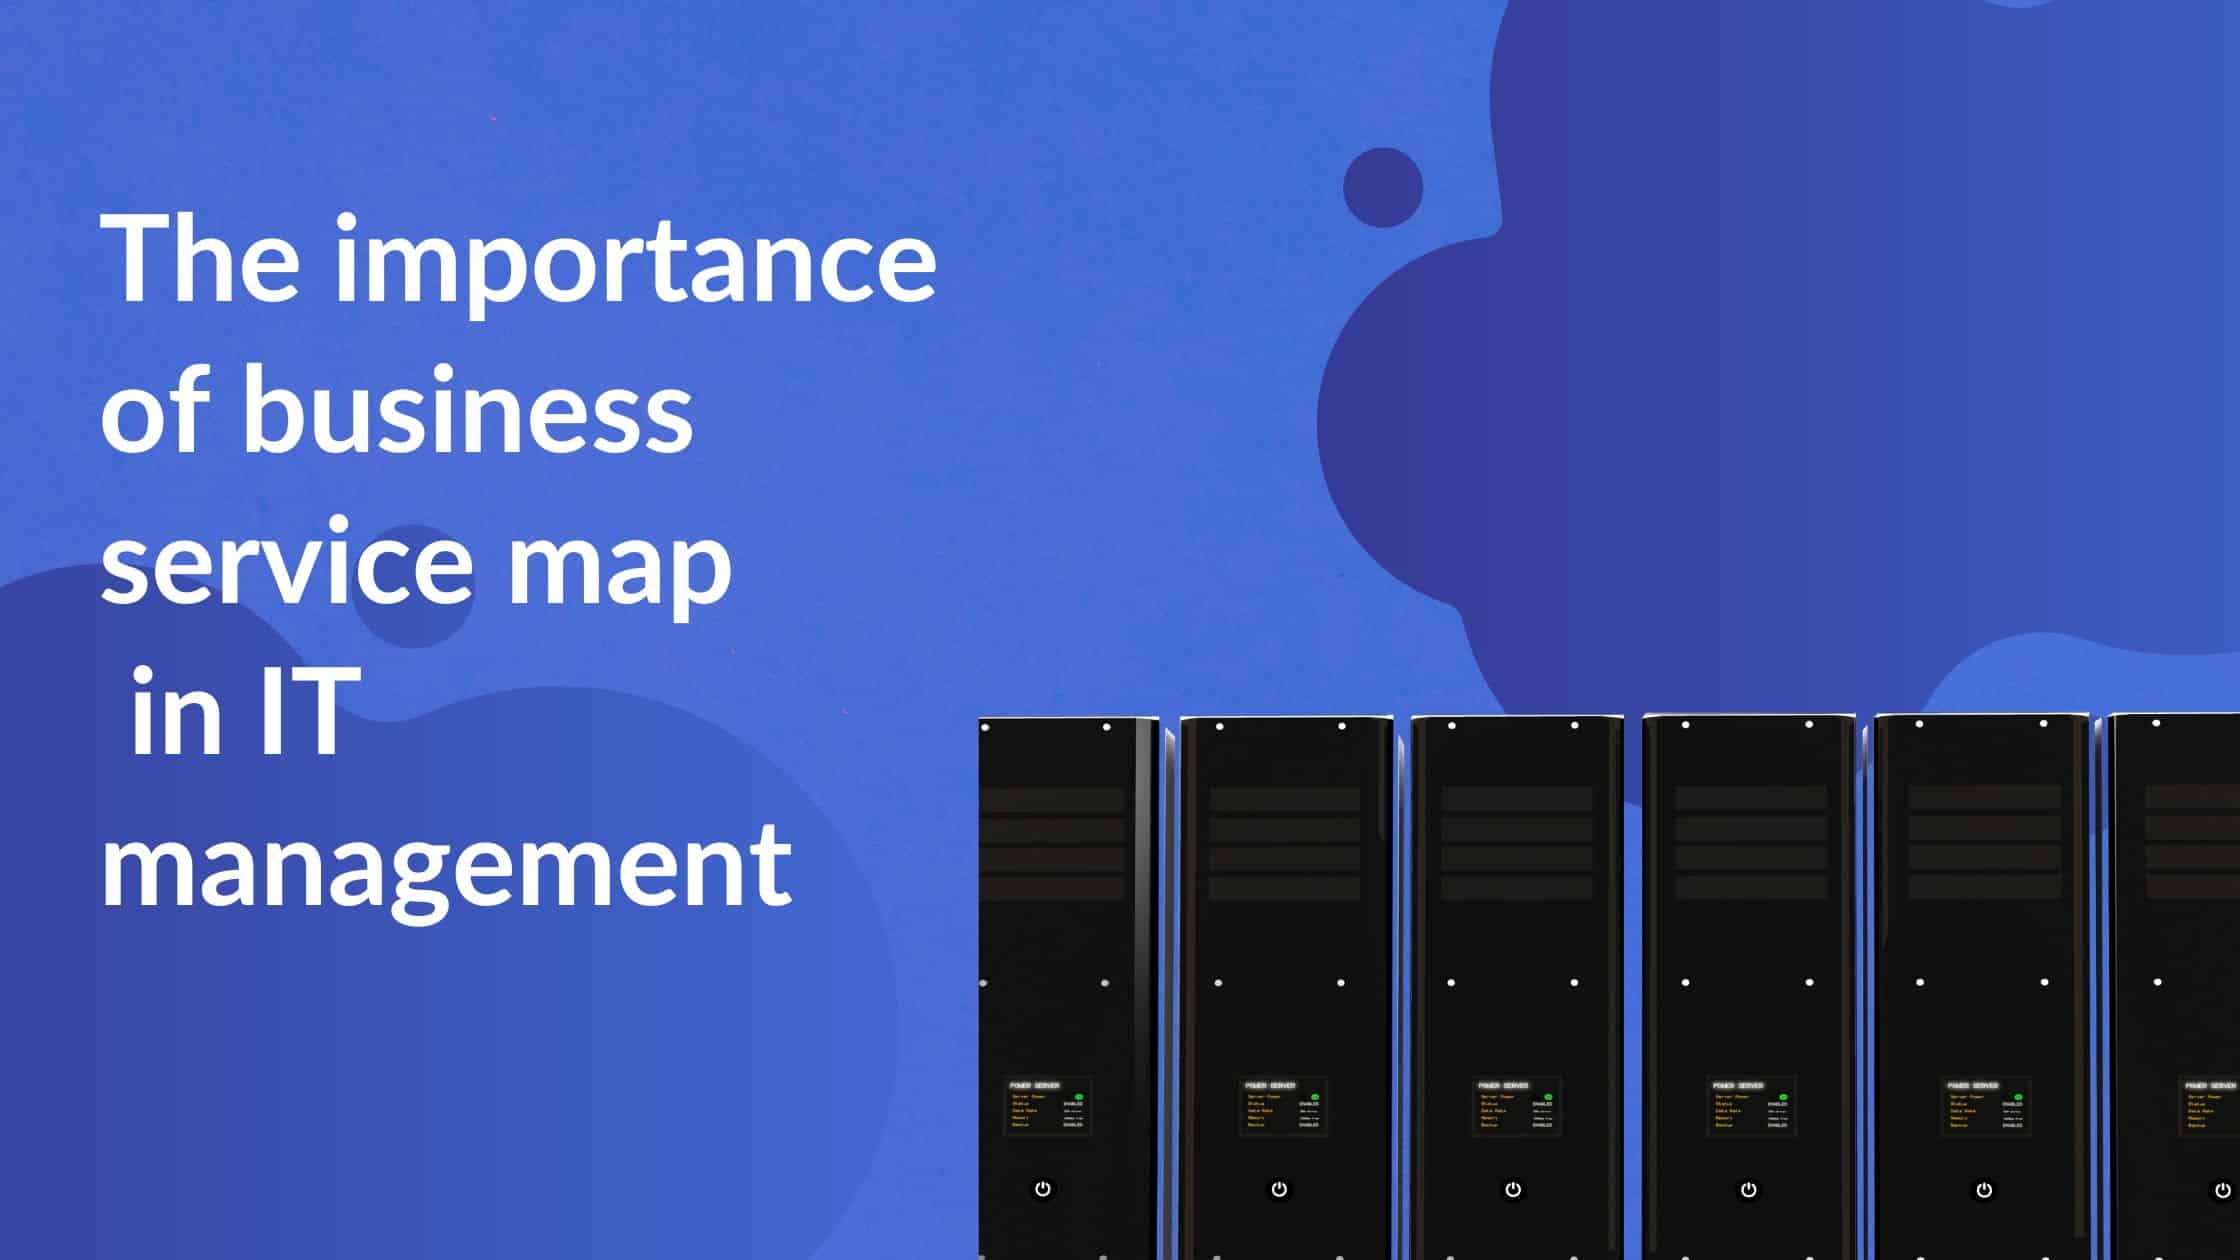 Importance of business service map in IT